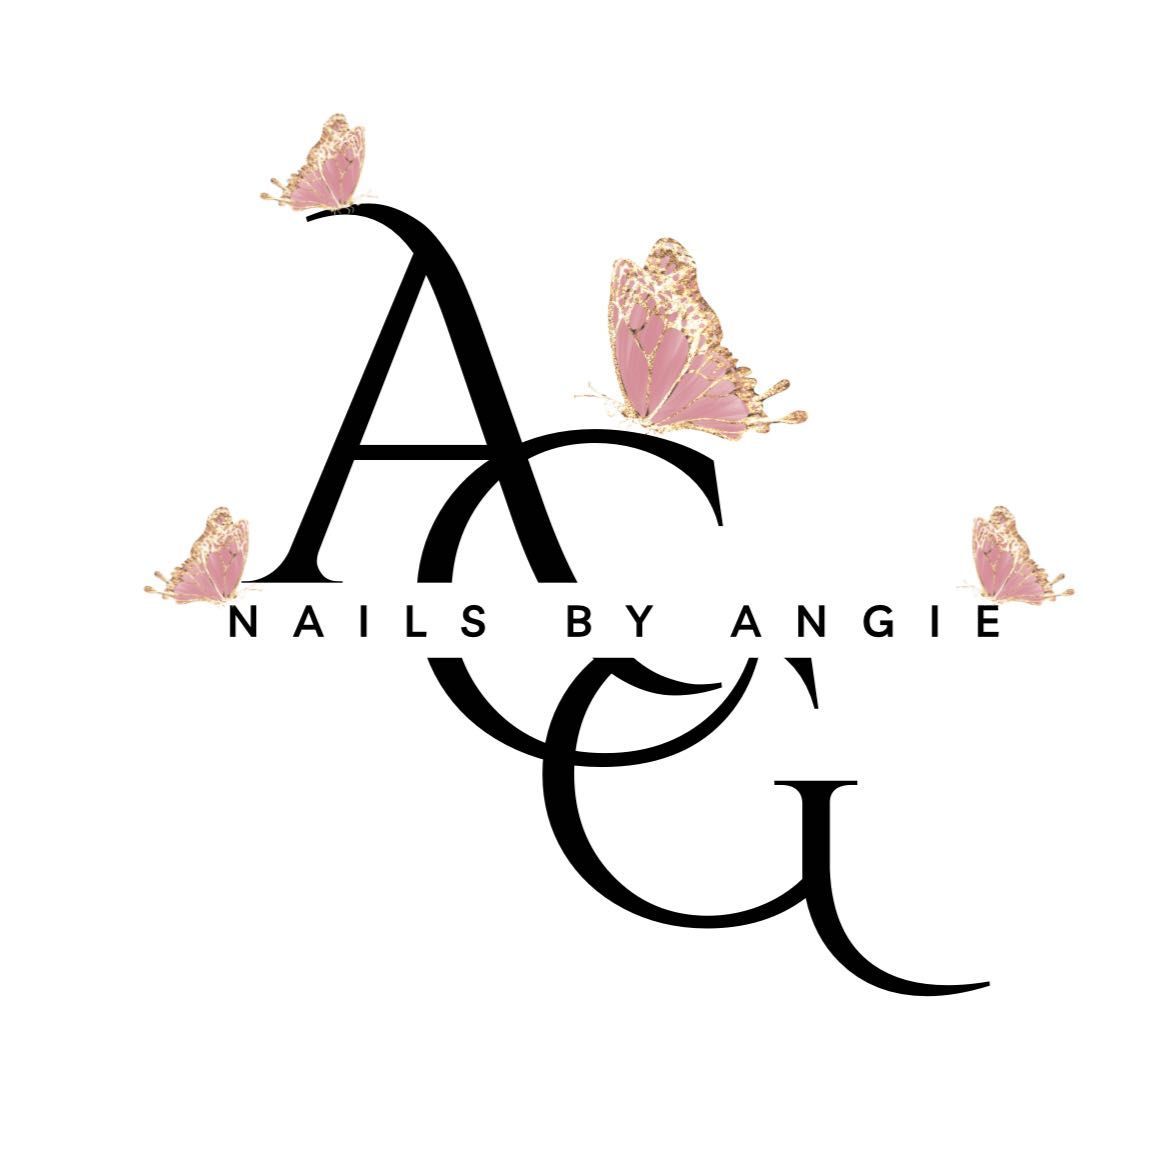 Angie Nails, 138 briggs st, Providence, 02905